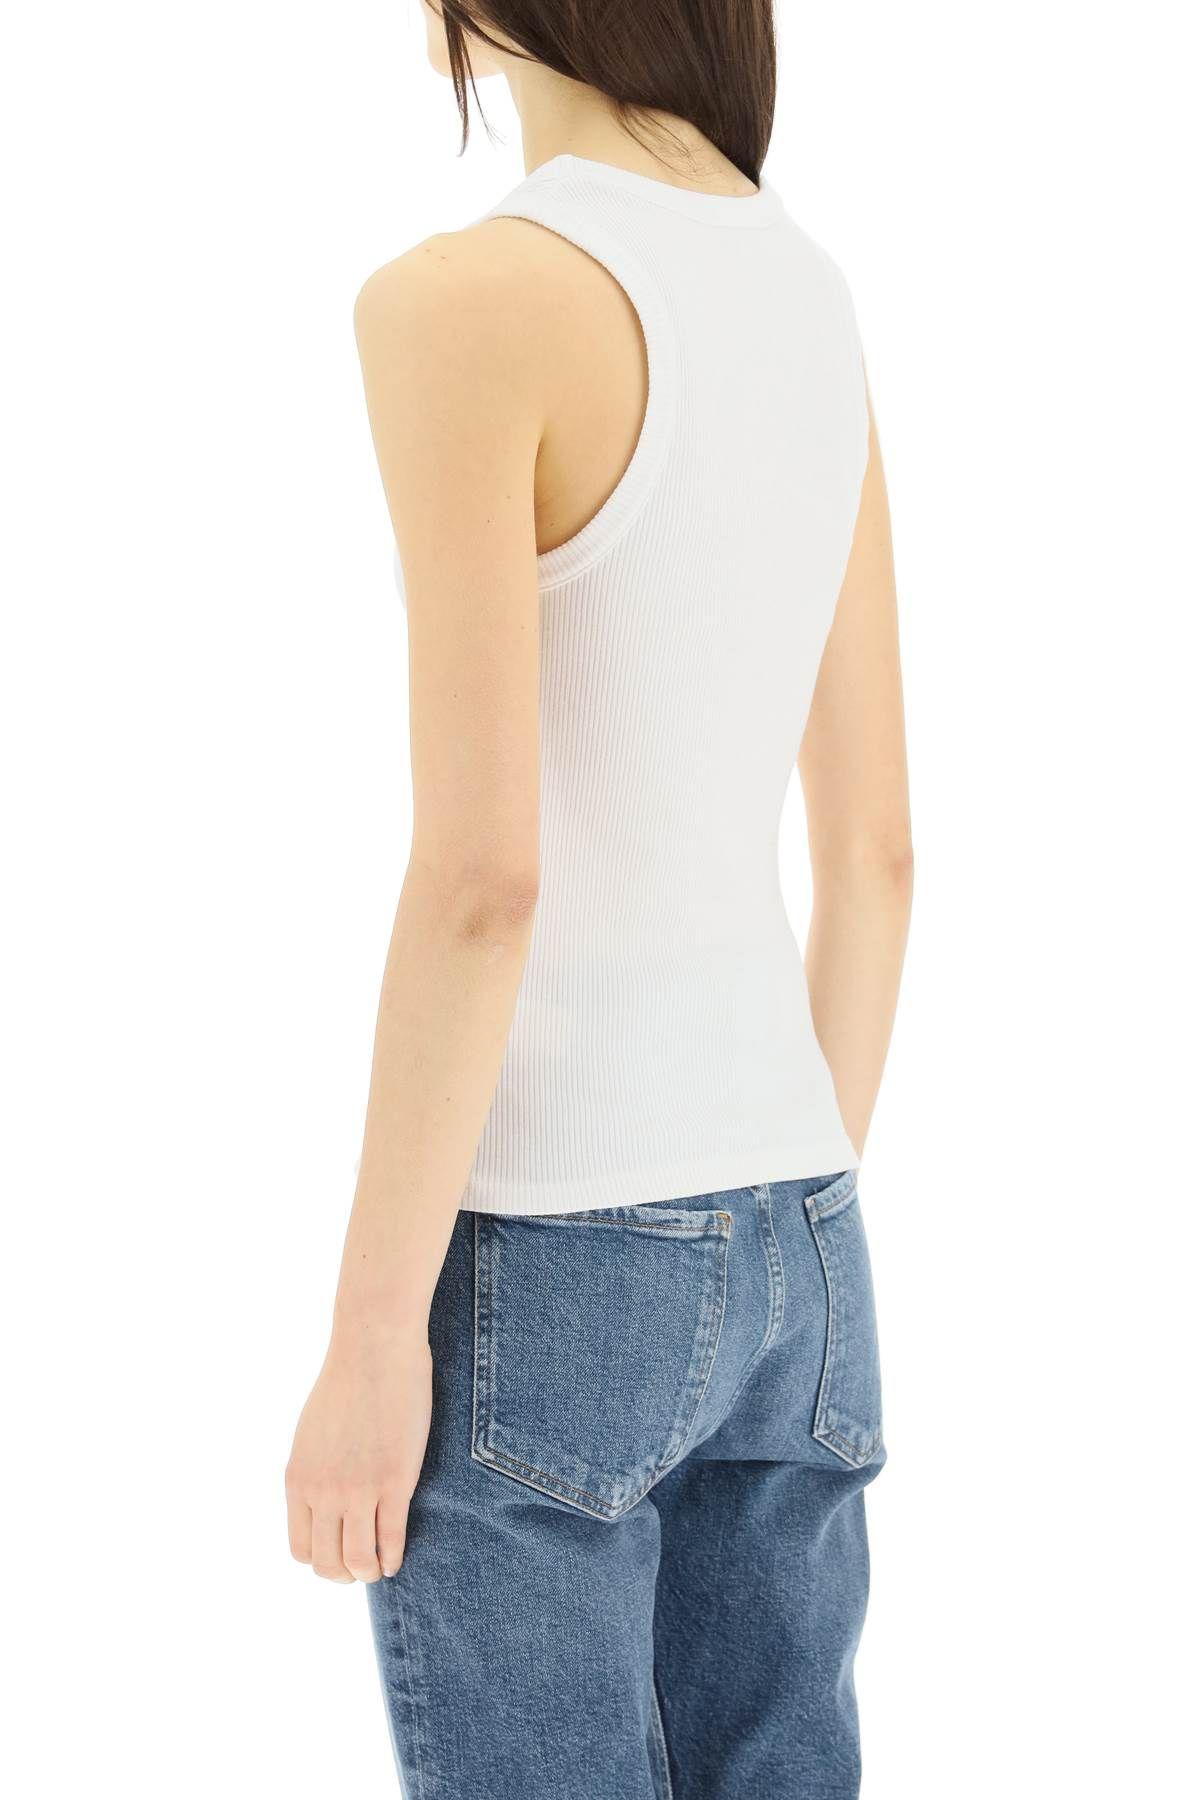 Shop Agolde Basic Tank Top In Wht White